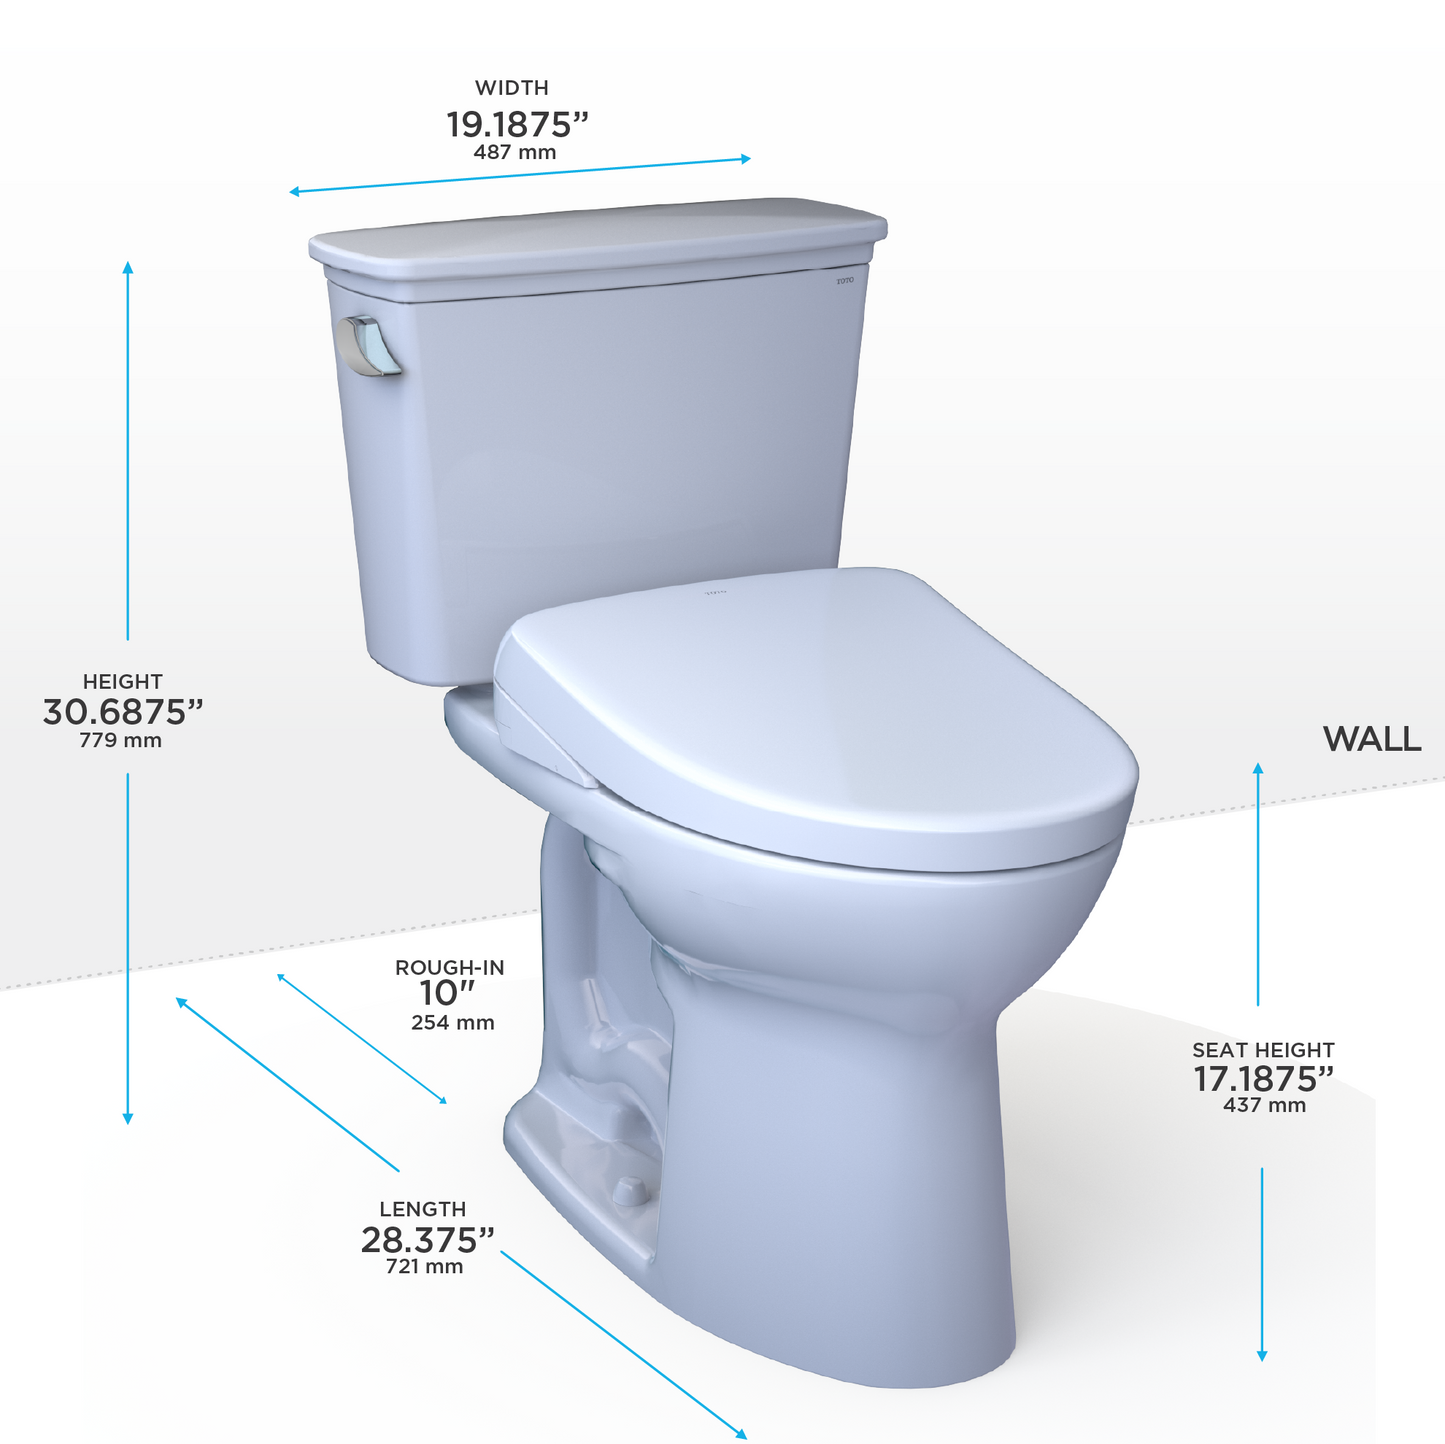 TOTO® Drake® Transitional WASHLET®+ Two-Piece Elongated 1.28 GPF Universal Height TORNADO FLUSH® Toilet and S7A Contemporary Bidet Seat with Auto Flush, Cotton White - MW7864736CEFGA.10#01